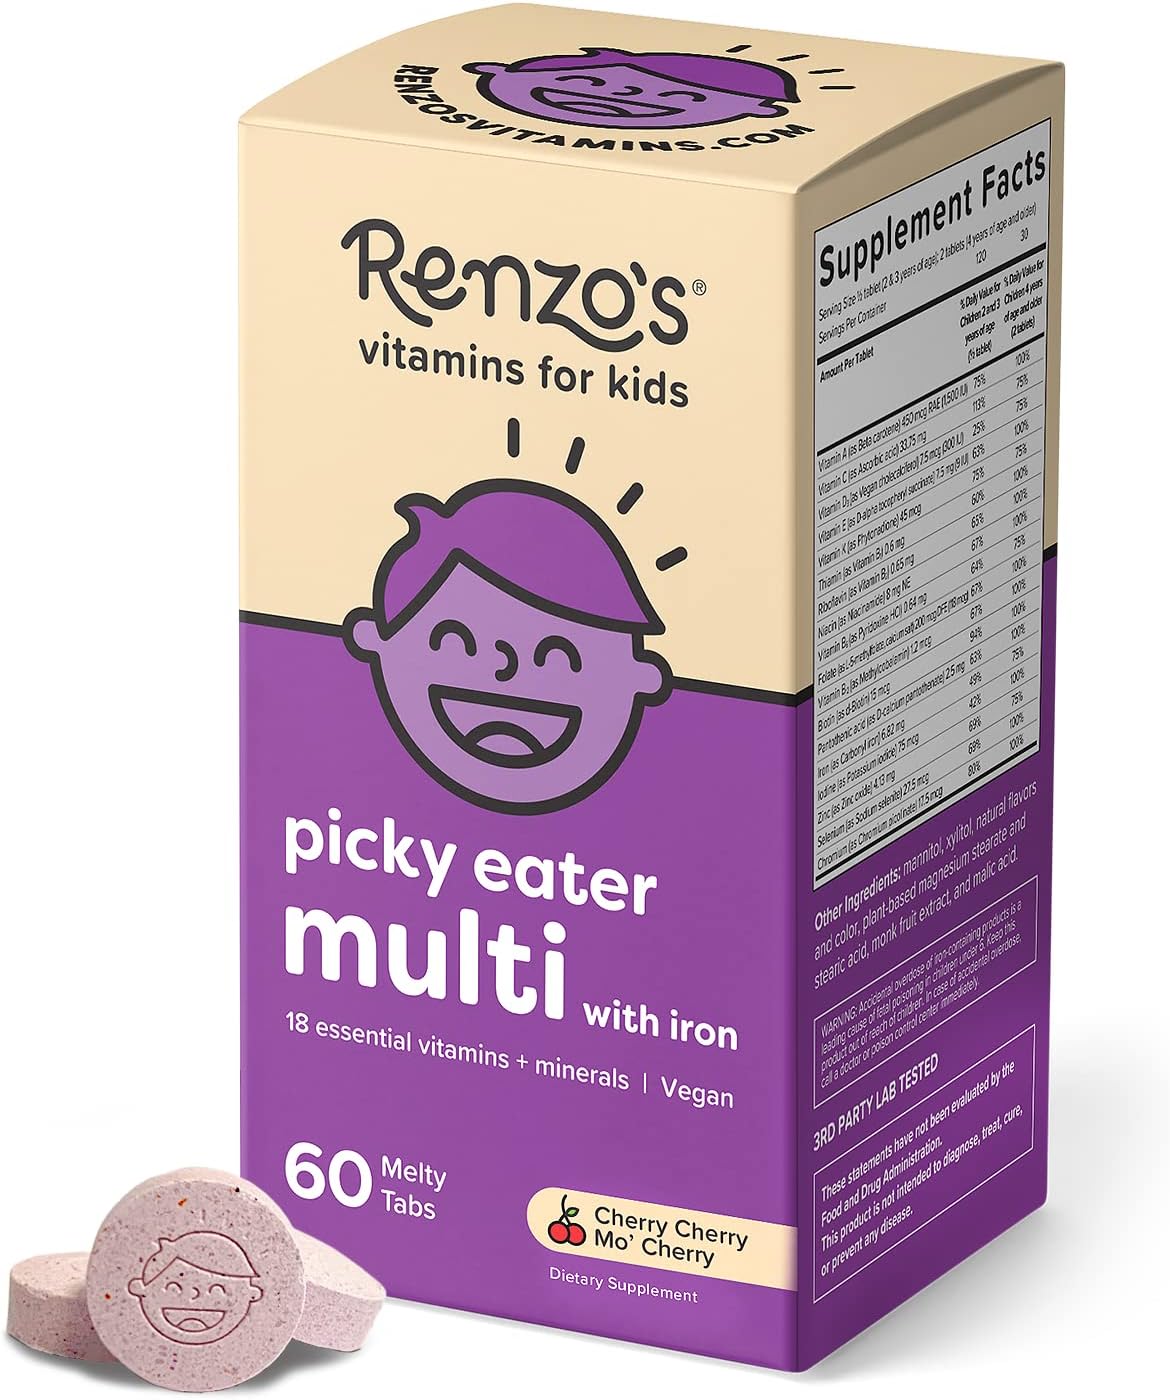 Renzo's Picky Eater Kids Multivitamin with Iron - Dissolving Kids Vitamins with Vitamin D3 & K2 and More - 60 Sugar-Free Melty Tabs, Cherry Cherry Mo? Cherry Flavored